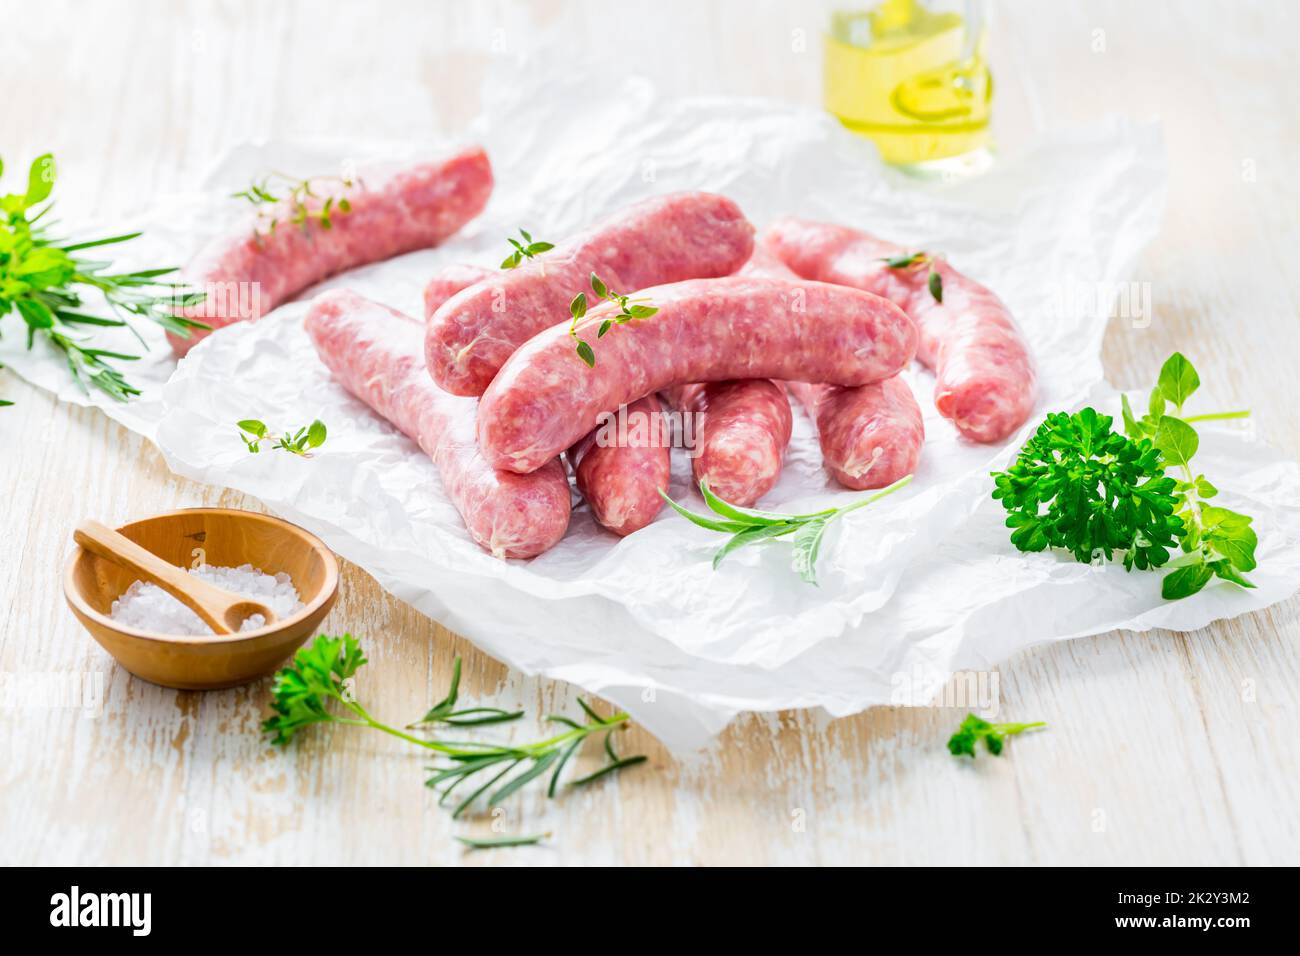 Raw sausages prepared for BBQ and grill with herbs and onions Stock Photo